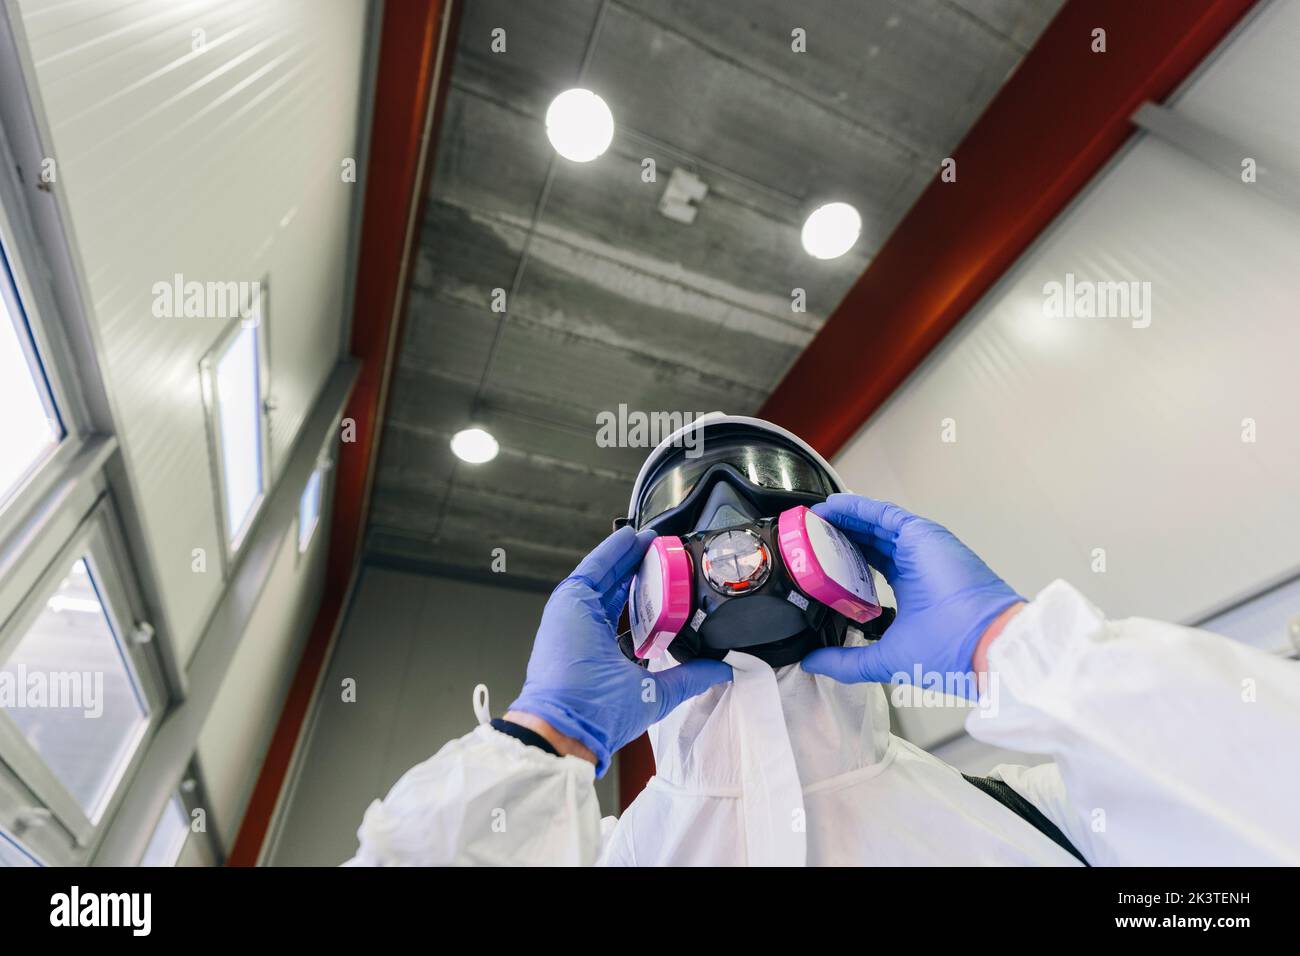 Firefighter putting on mask to disinfect a building Stock Photo